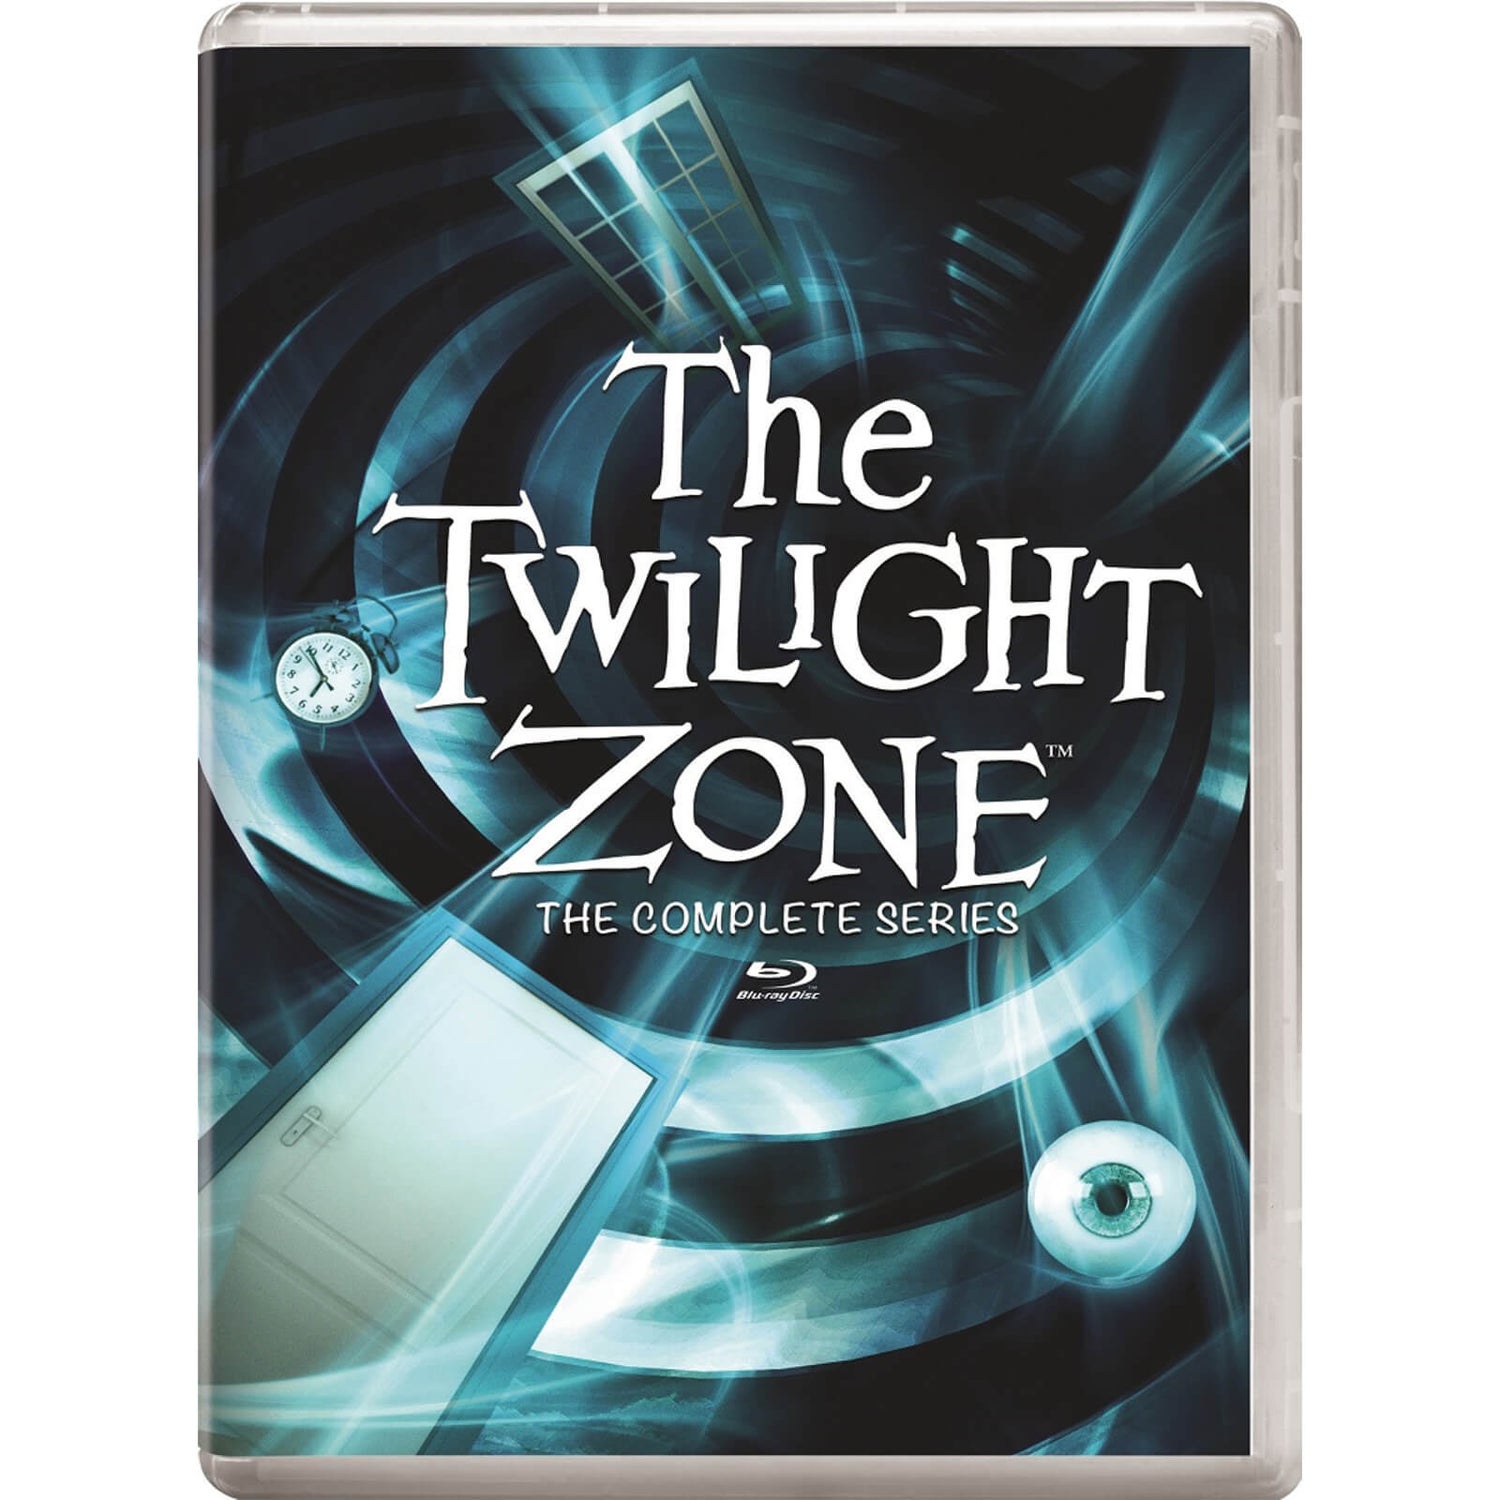 The Twilight Zone: The Complete Series (US Import)